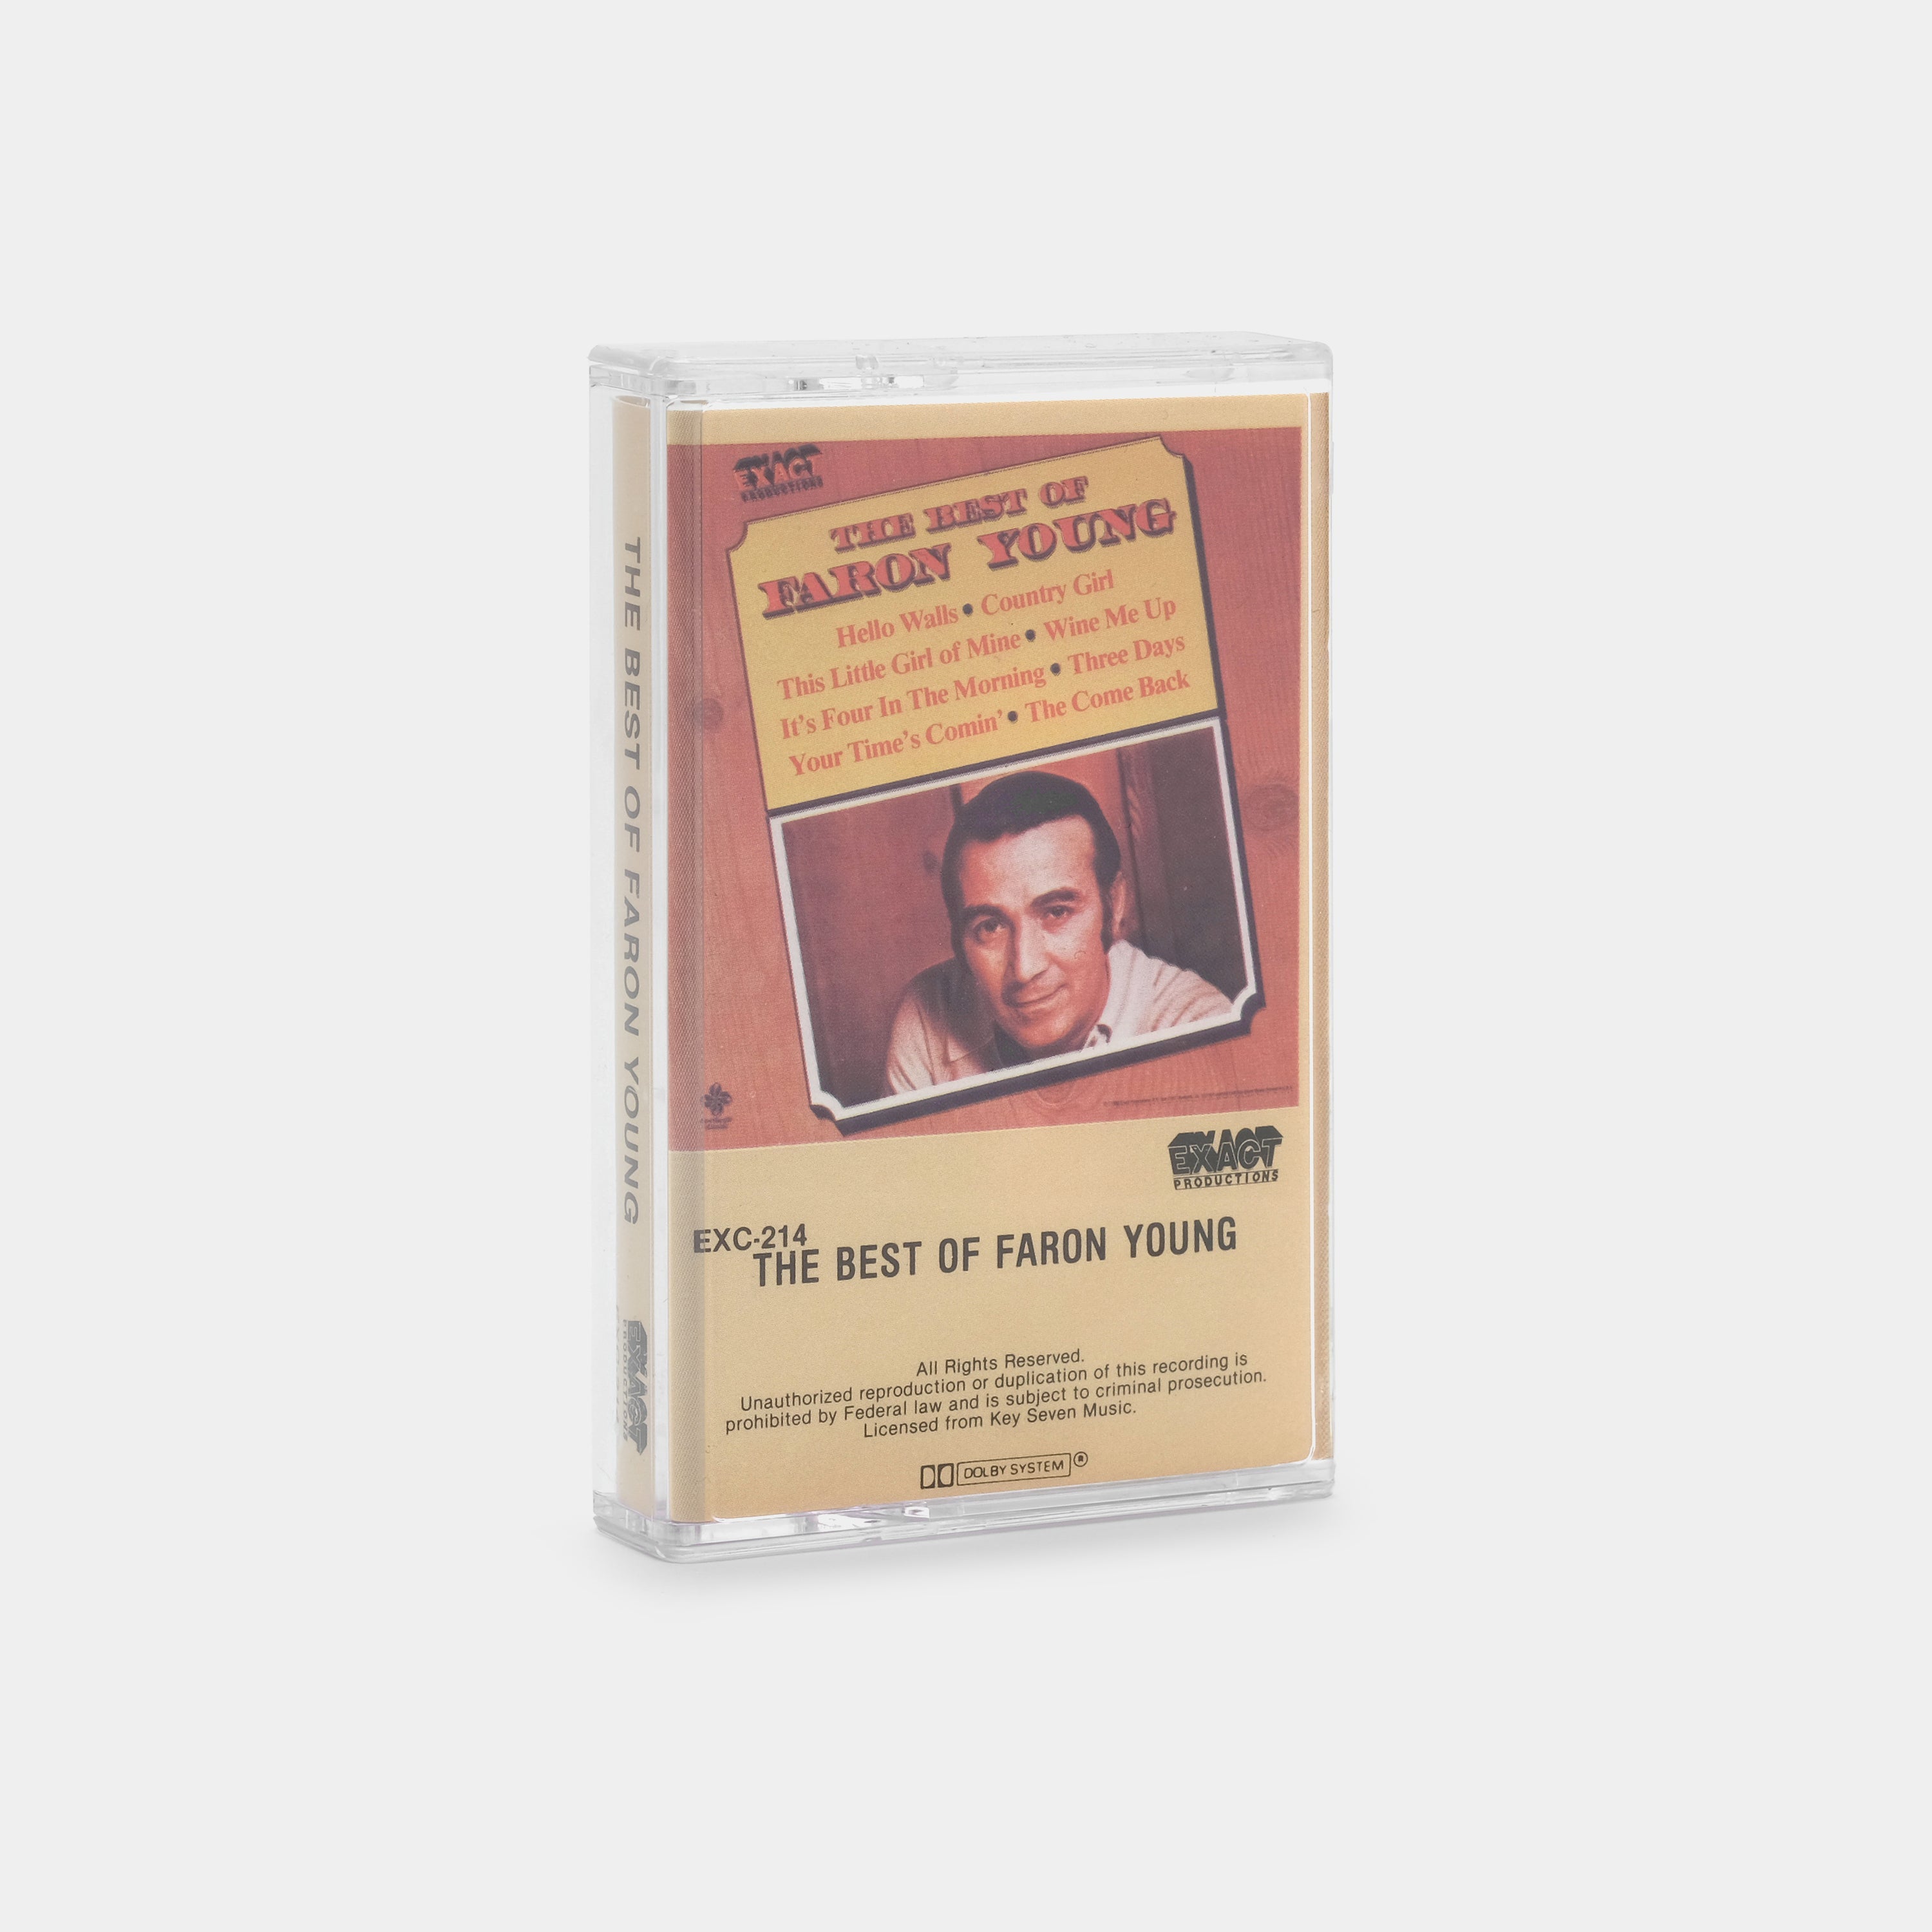 Faron Young - The Best Of Faron Young Cassette Tape